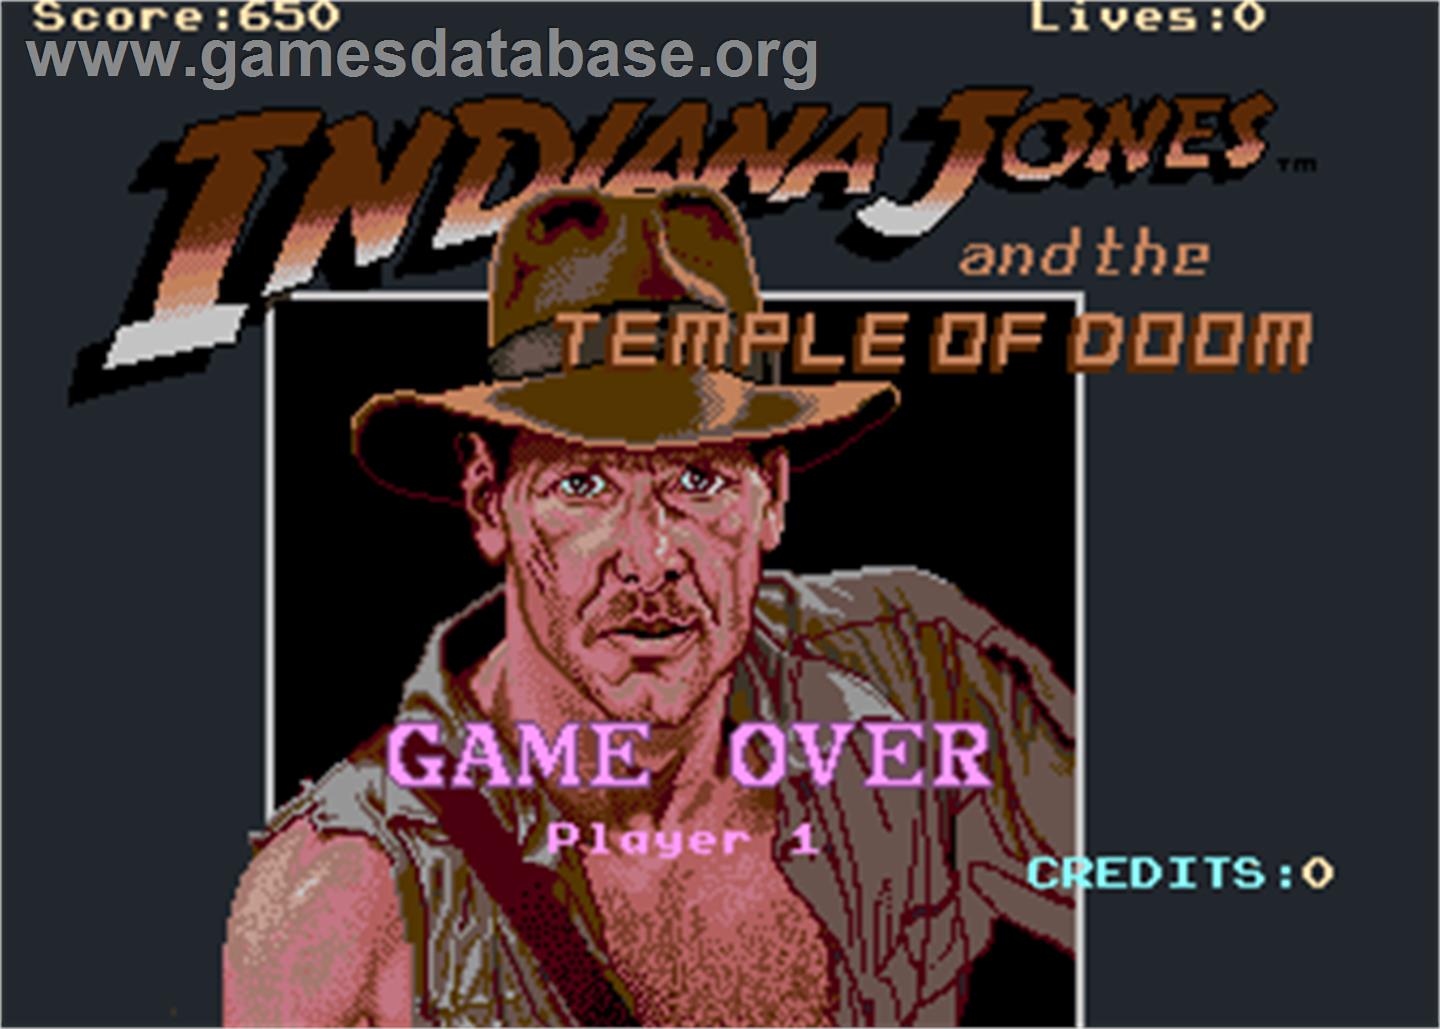 Indiana Jones and the Temple of Doom - Arcade - Artwork - Game Over Screen